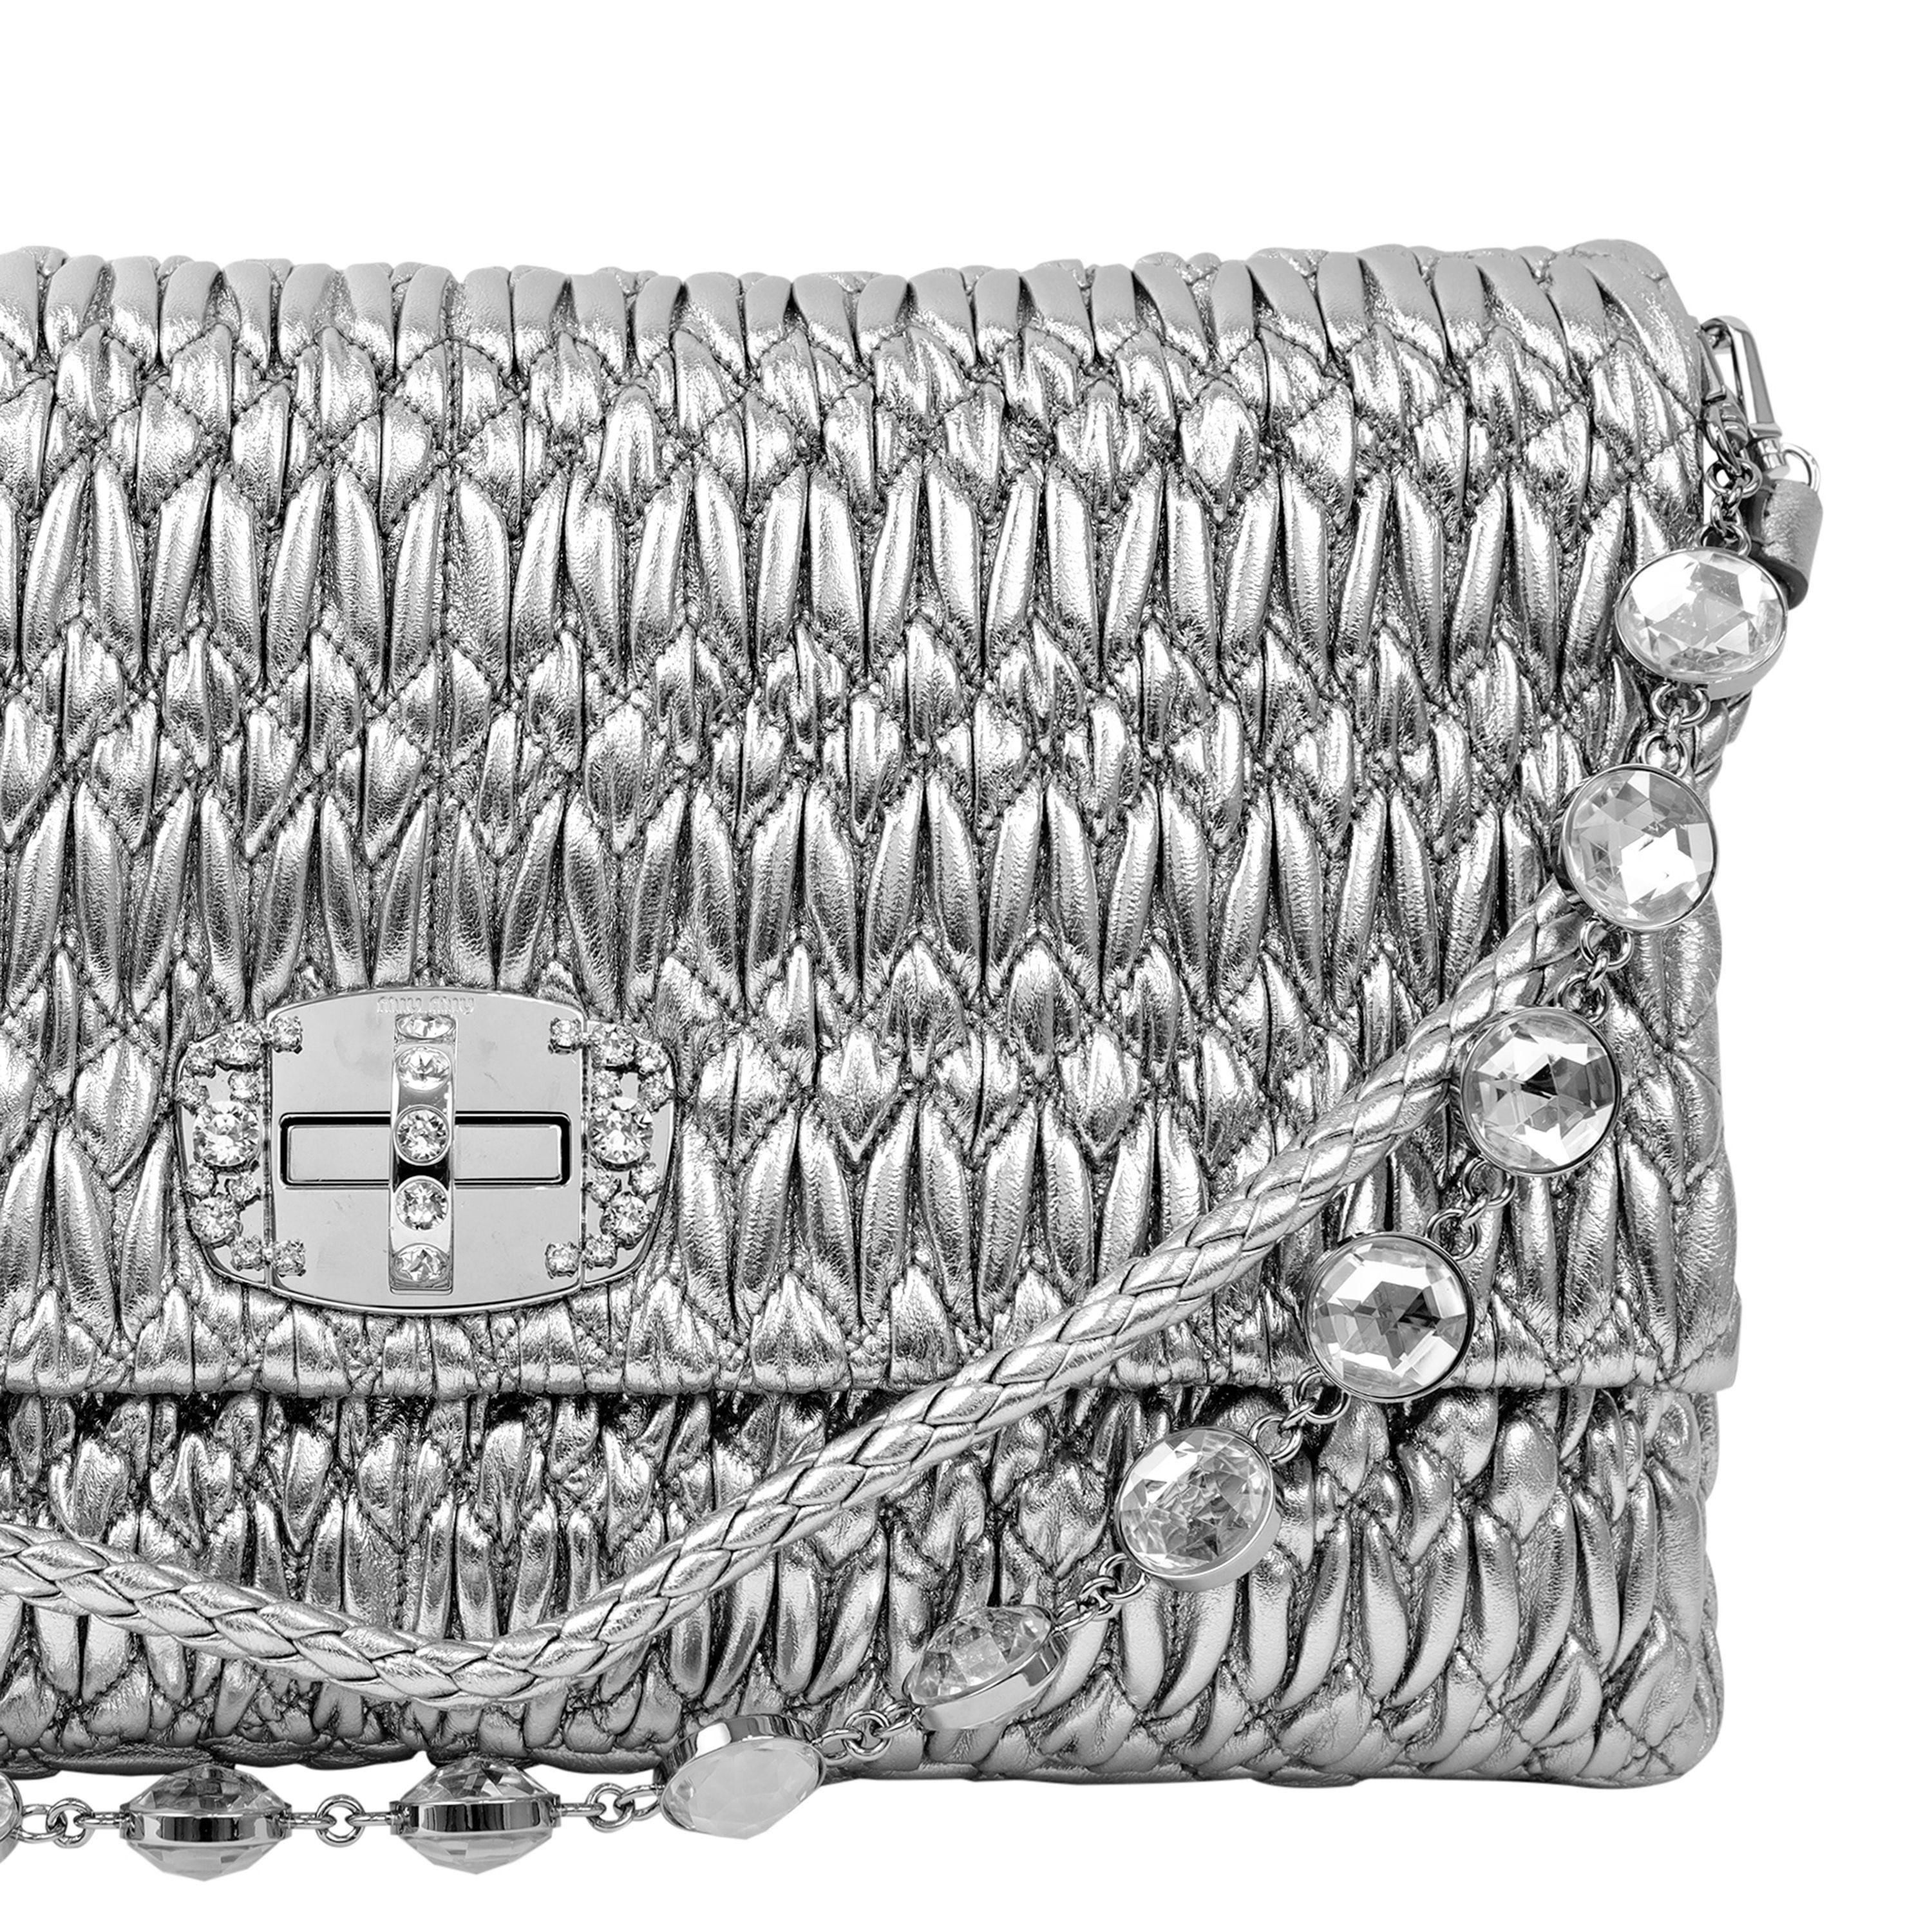  Miu Miu Metallic Silver Iconic Crystal Cloquè Large Bag In Excellent Condition For Sale In Palm Beach, FL